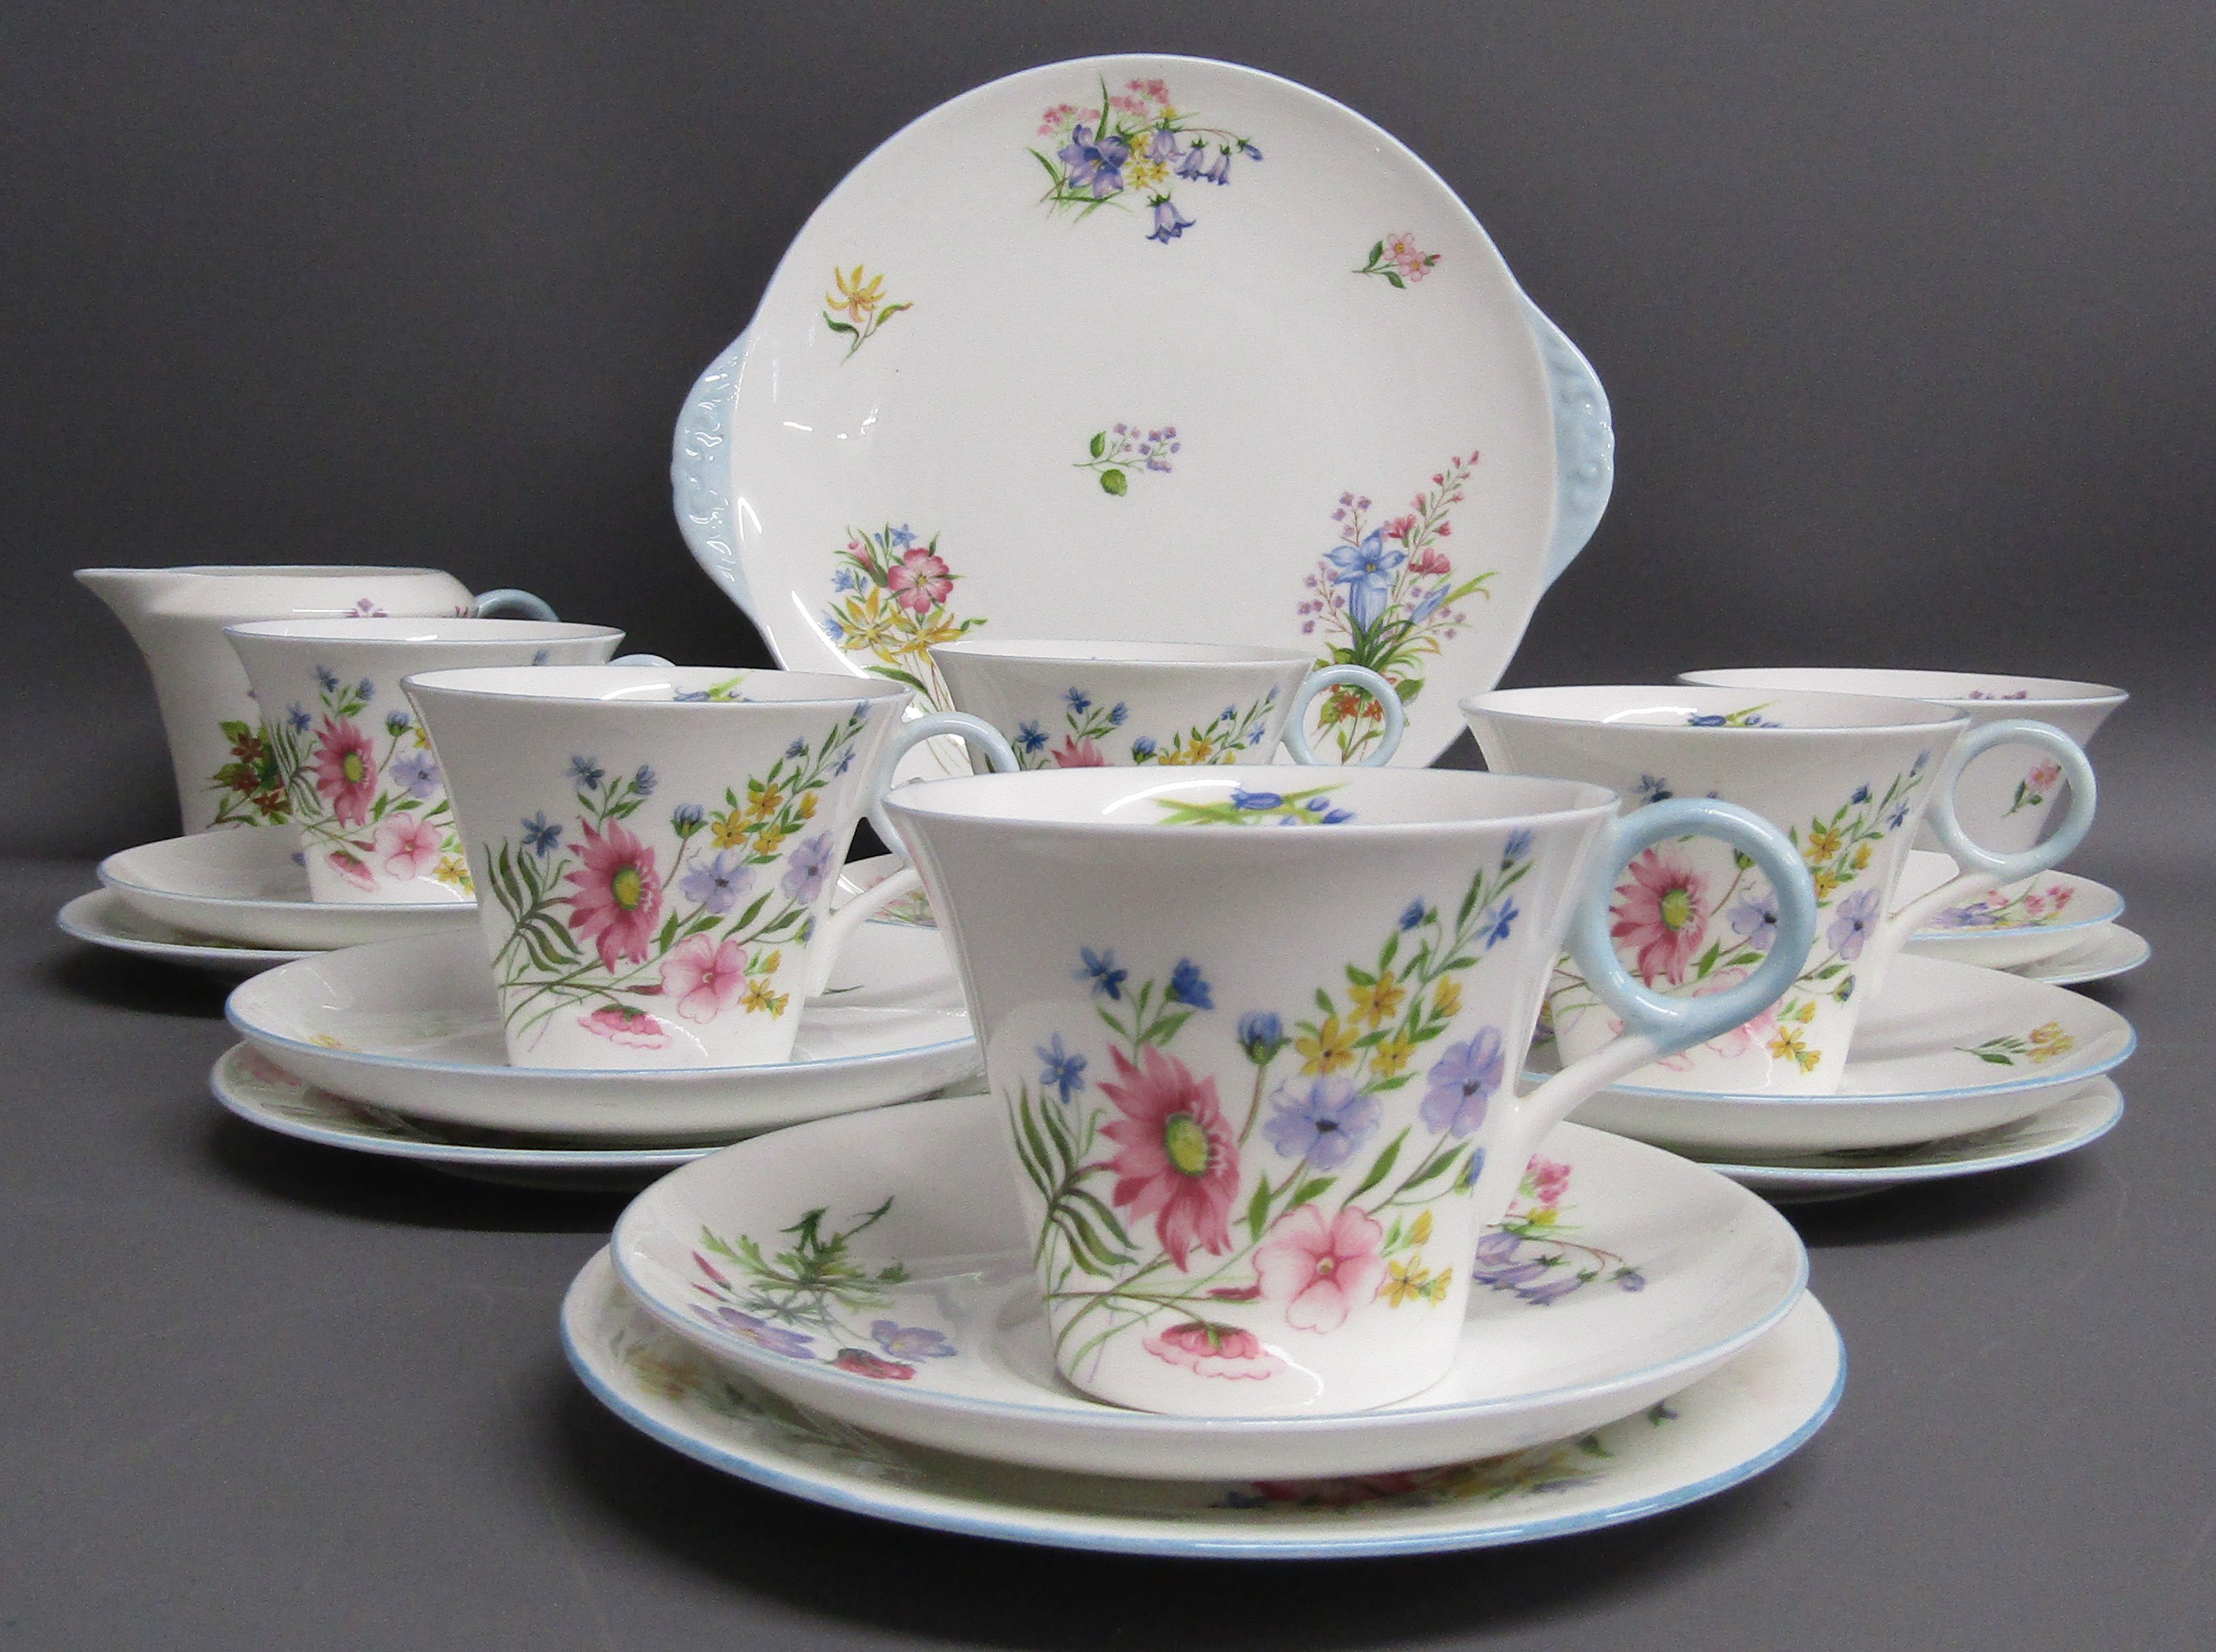 Shelley 'Wild Flowers' 13668 cake plate, milk jug, sugar bowl, side plates, cups & saucers - one cup - Image 2 of 5